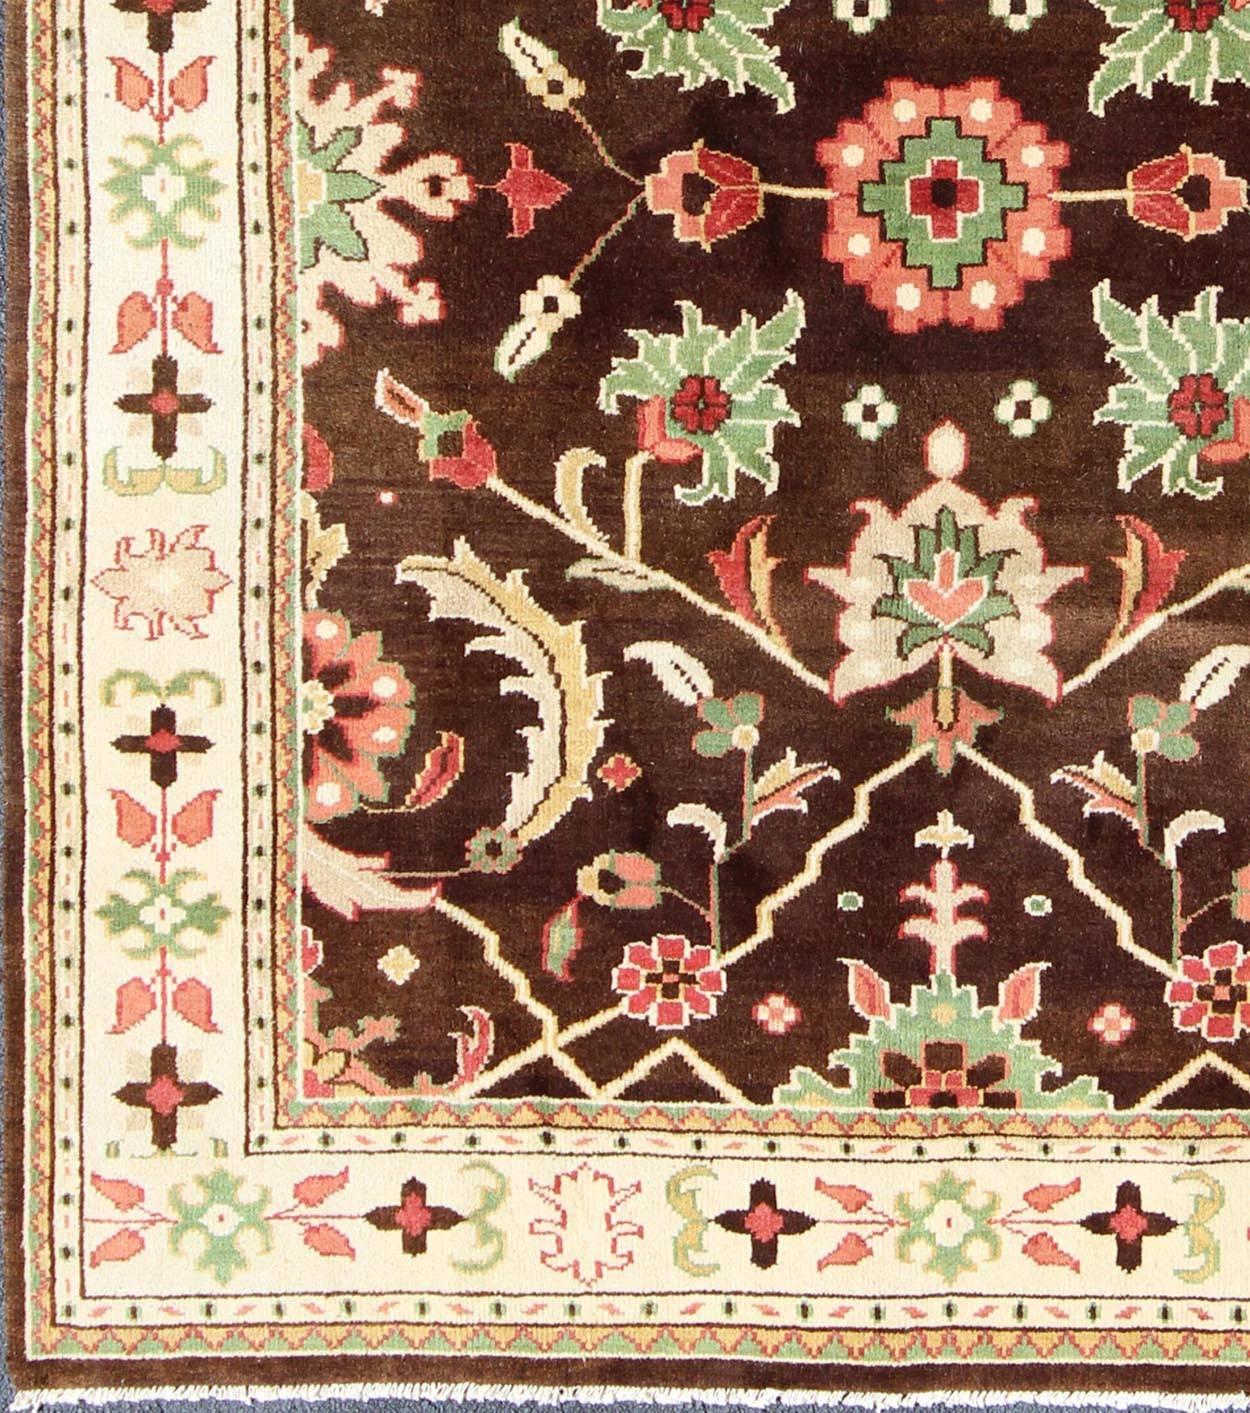 Brown, Green, coral, and mint Indian Sultanabad Design rug with vining flower design, rug 13-1204, country of origin / type: India / Sultanabad.

This beautiful and large Indian Sultanabad design rug displays a gorgeous, all-over vining floral